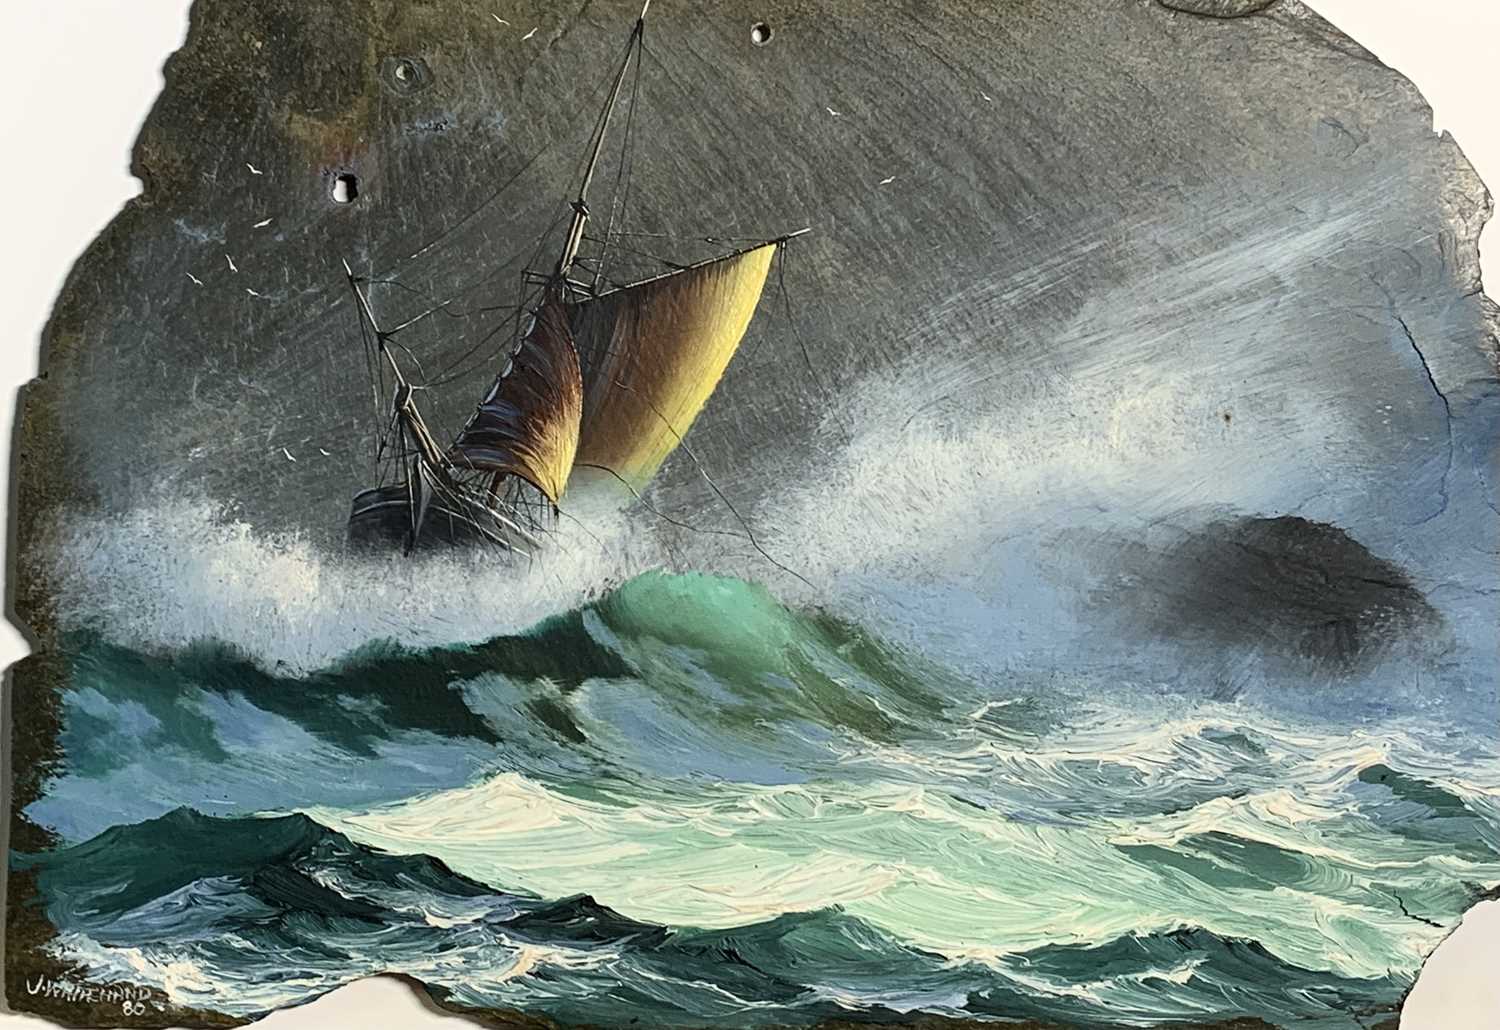 Michael J. WHITEHAND (1941) Lugger in Heavy Seas Oil on slate Signed and dated 80 26x37cm Together - Image 2 of 5